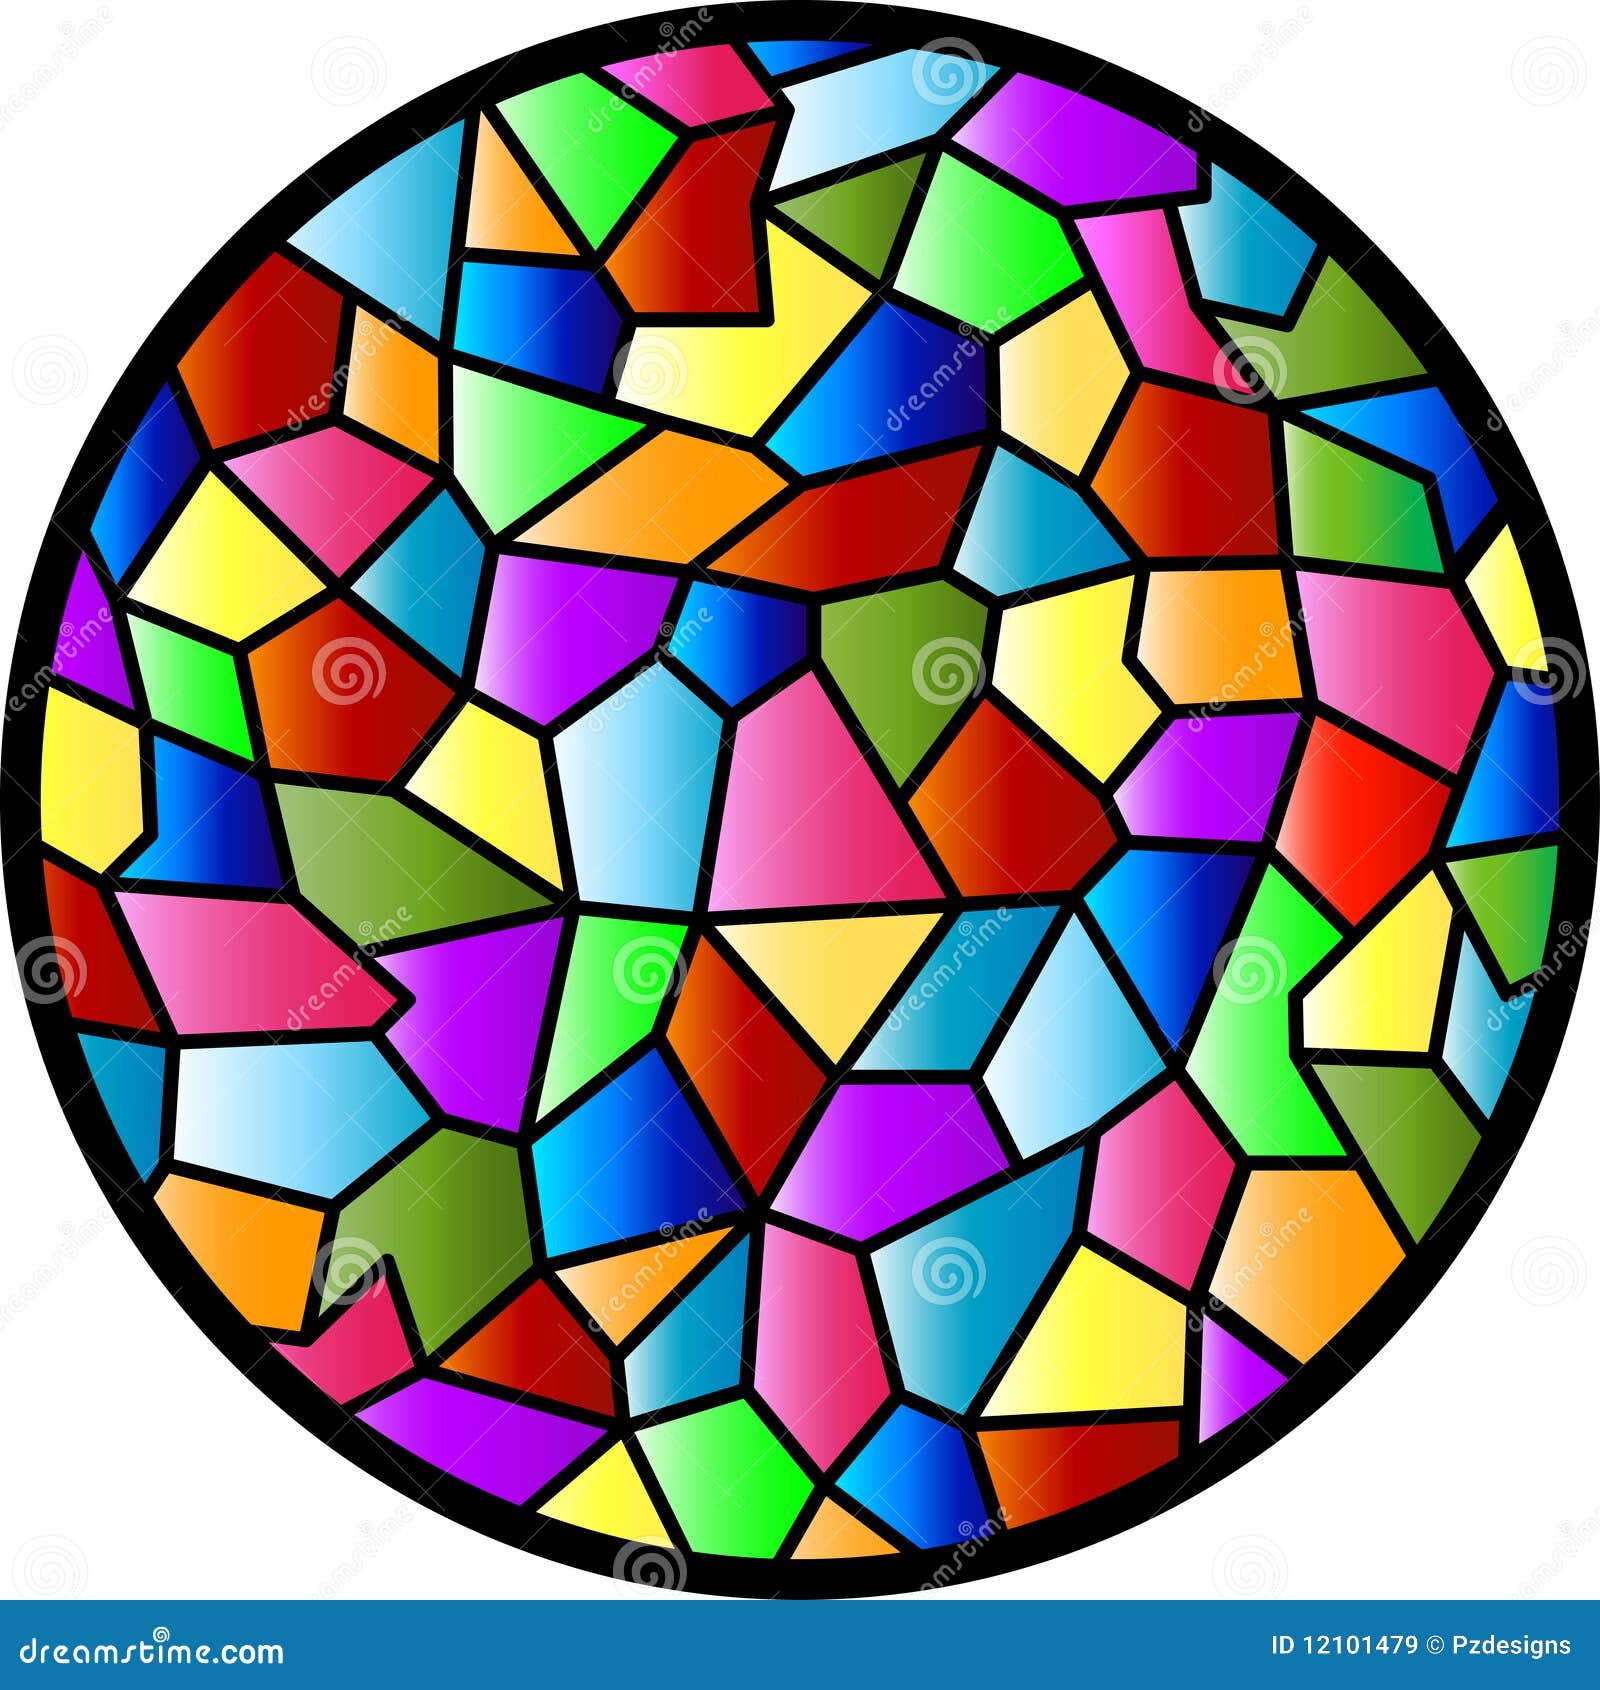 stained glass window clipart - photo #6